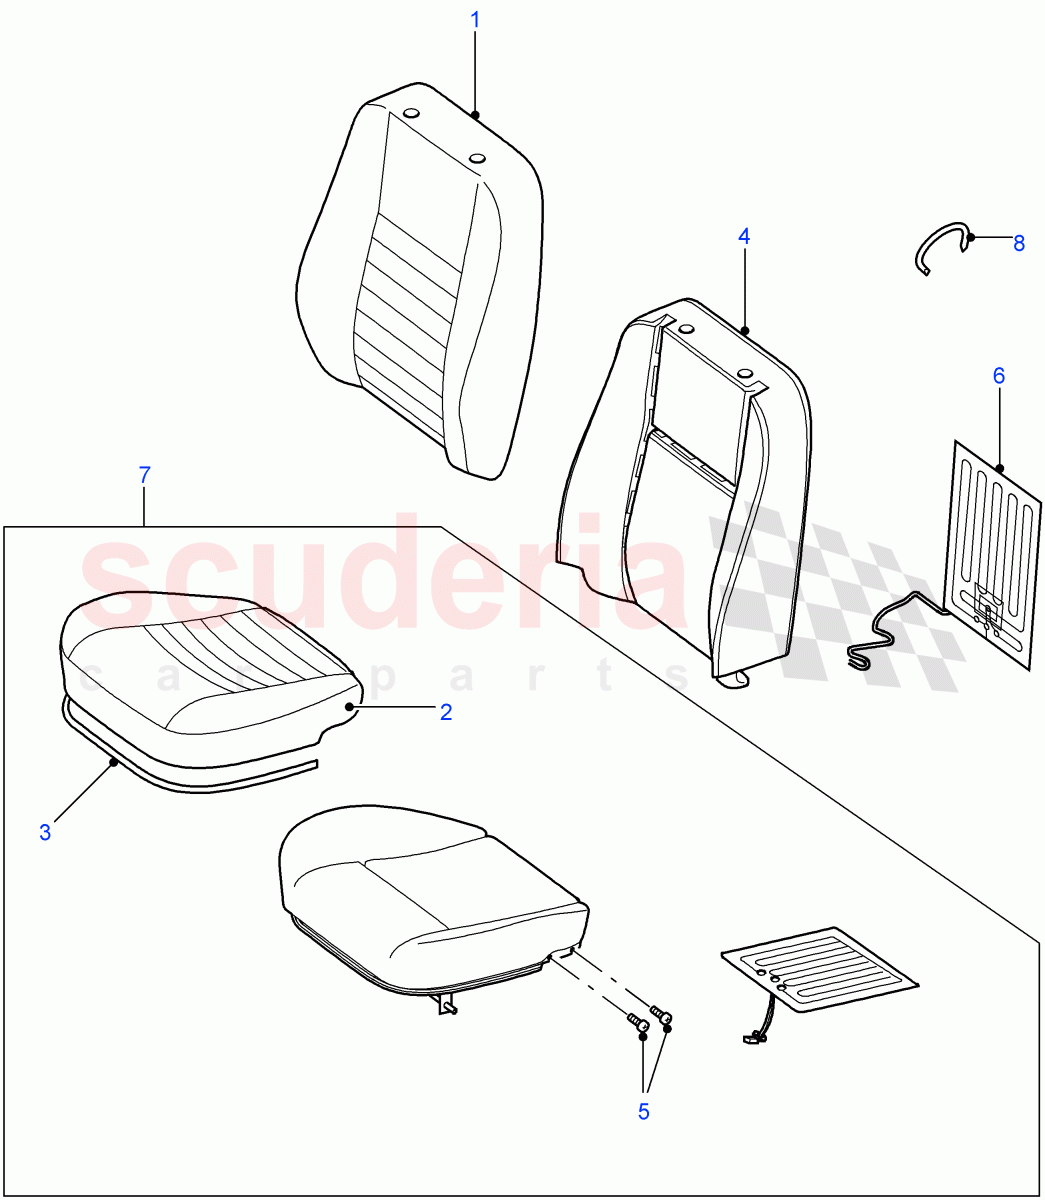 Front Seat Covers(County (Grey) Vinyl,Defender Cloth Black)((V)FROM7A000001) of Land Rover Land Rover Defender (2007-2016)